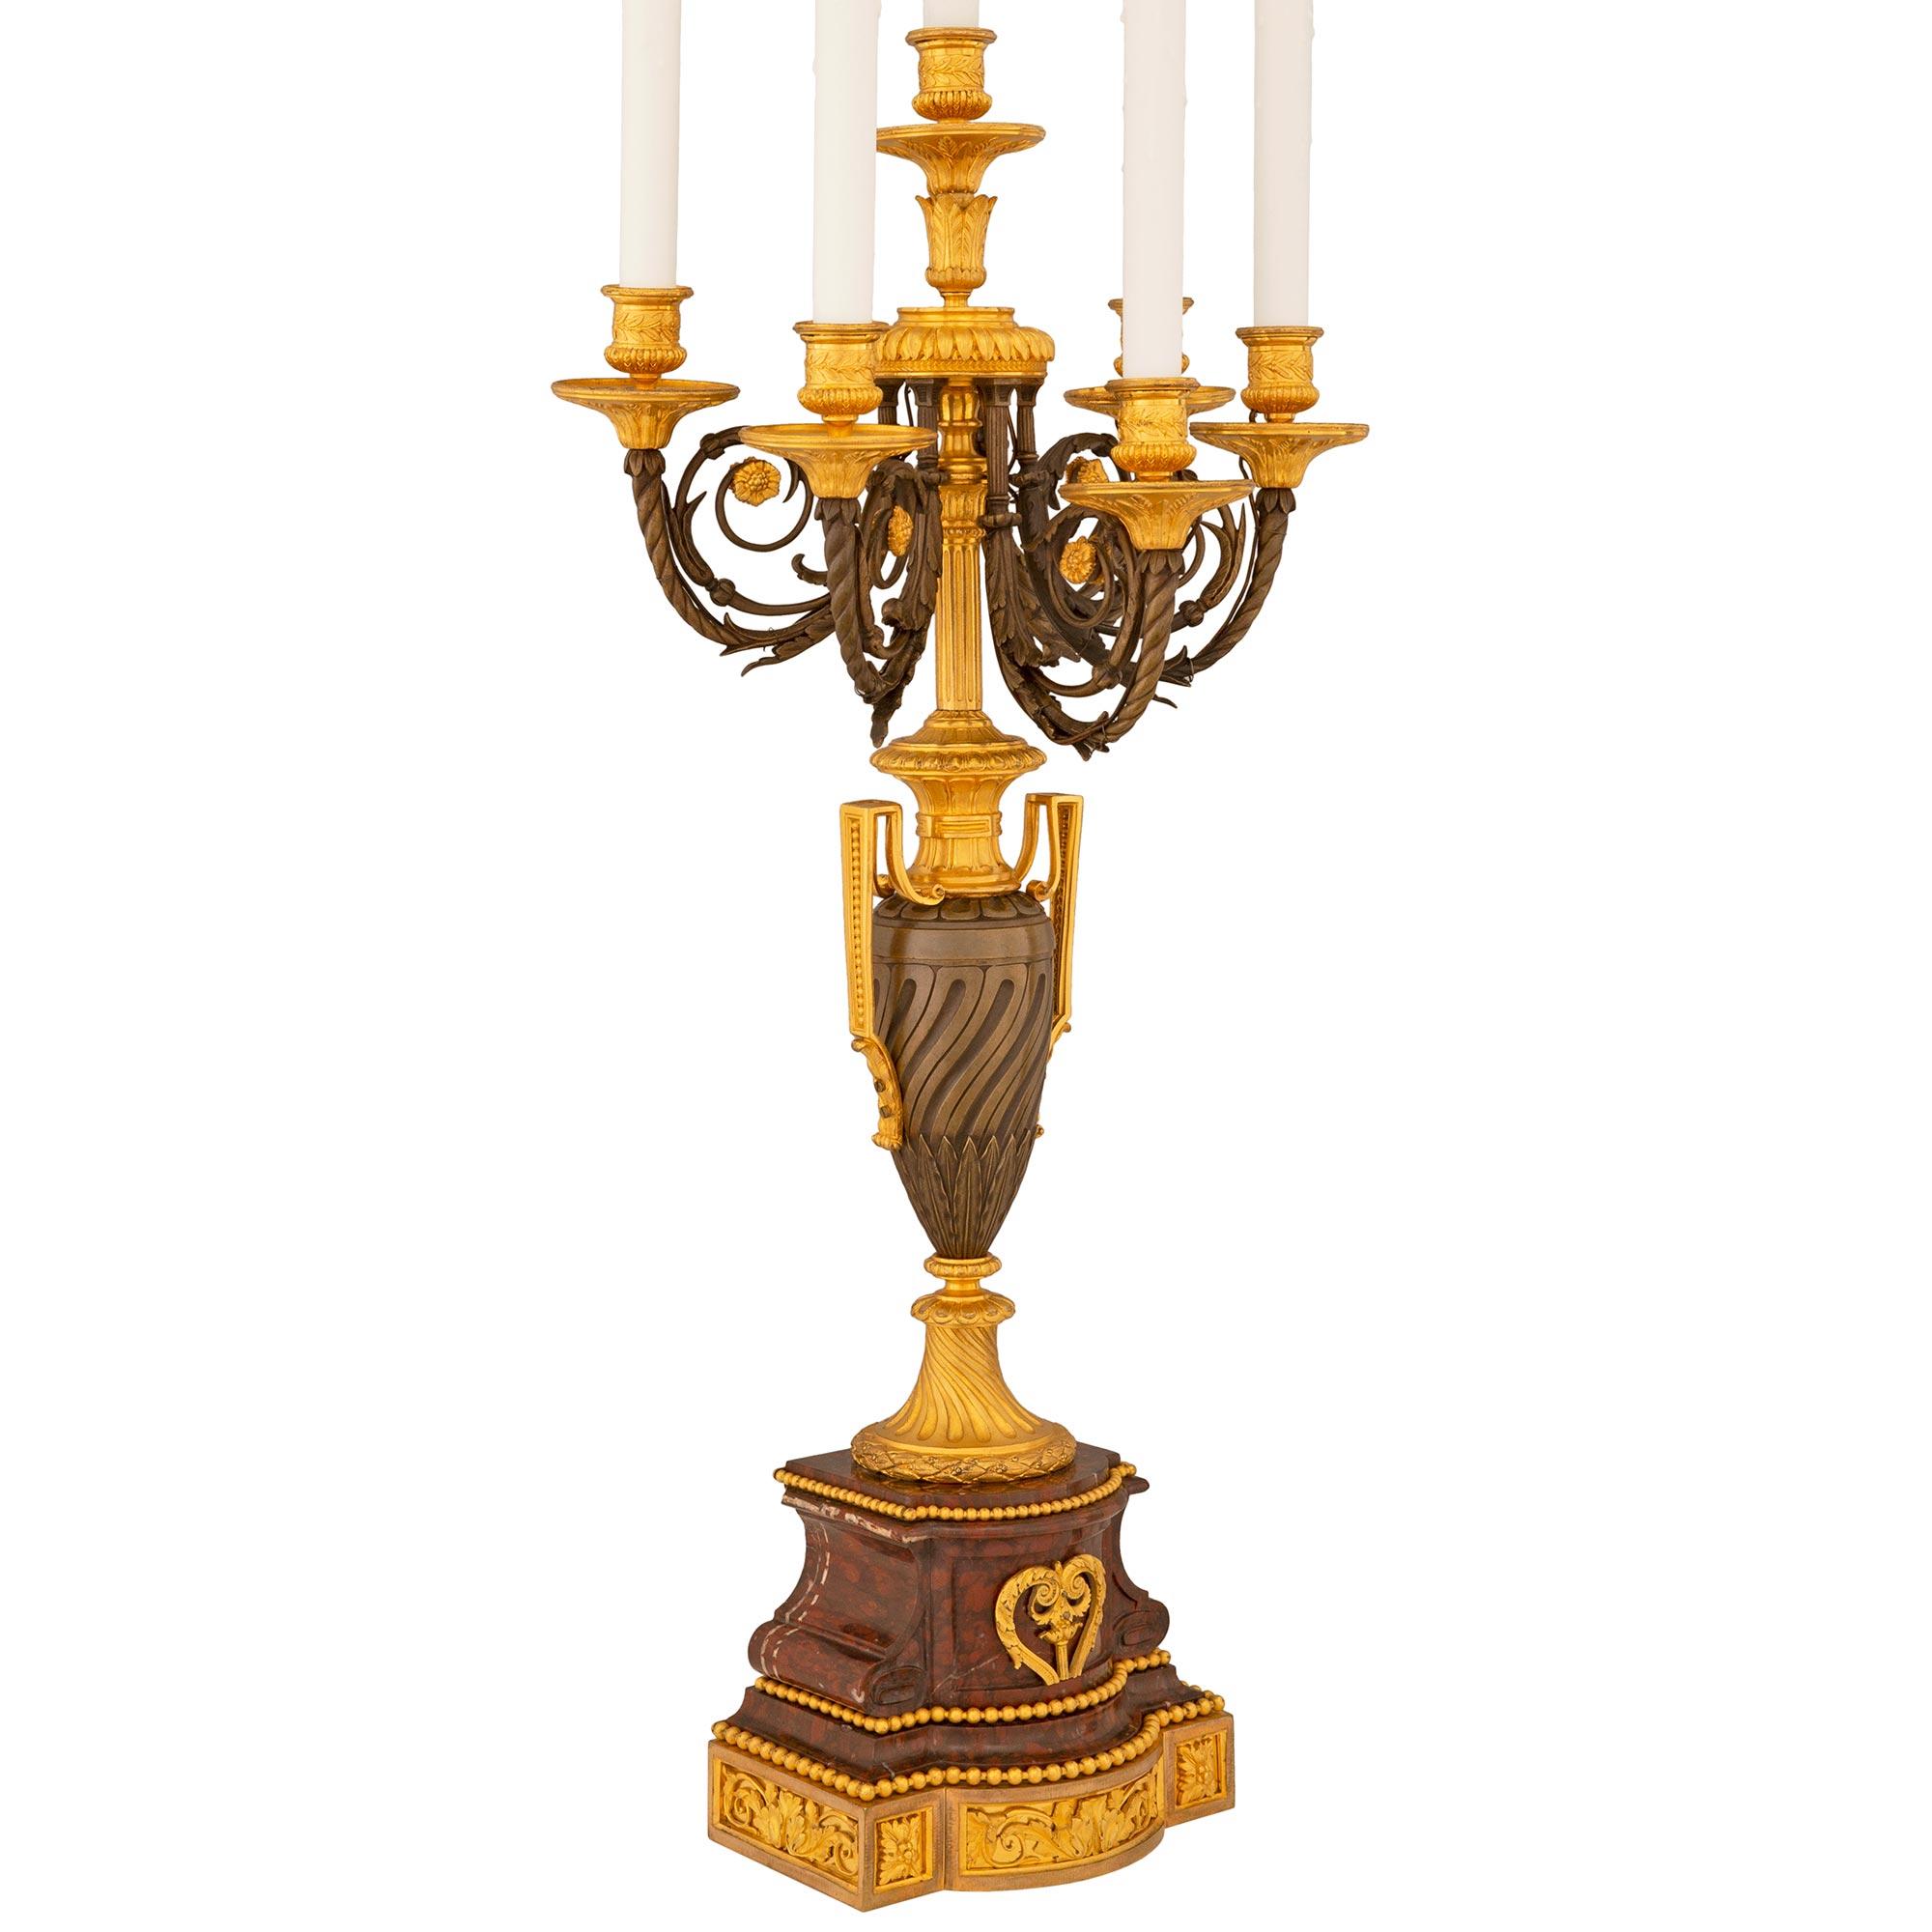 pair of French 19th century Louis XVI st. candelabra lamps, signed H. Picard In Good Condition For Sale In West Palm Beach, FL